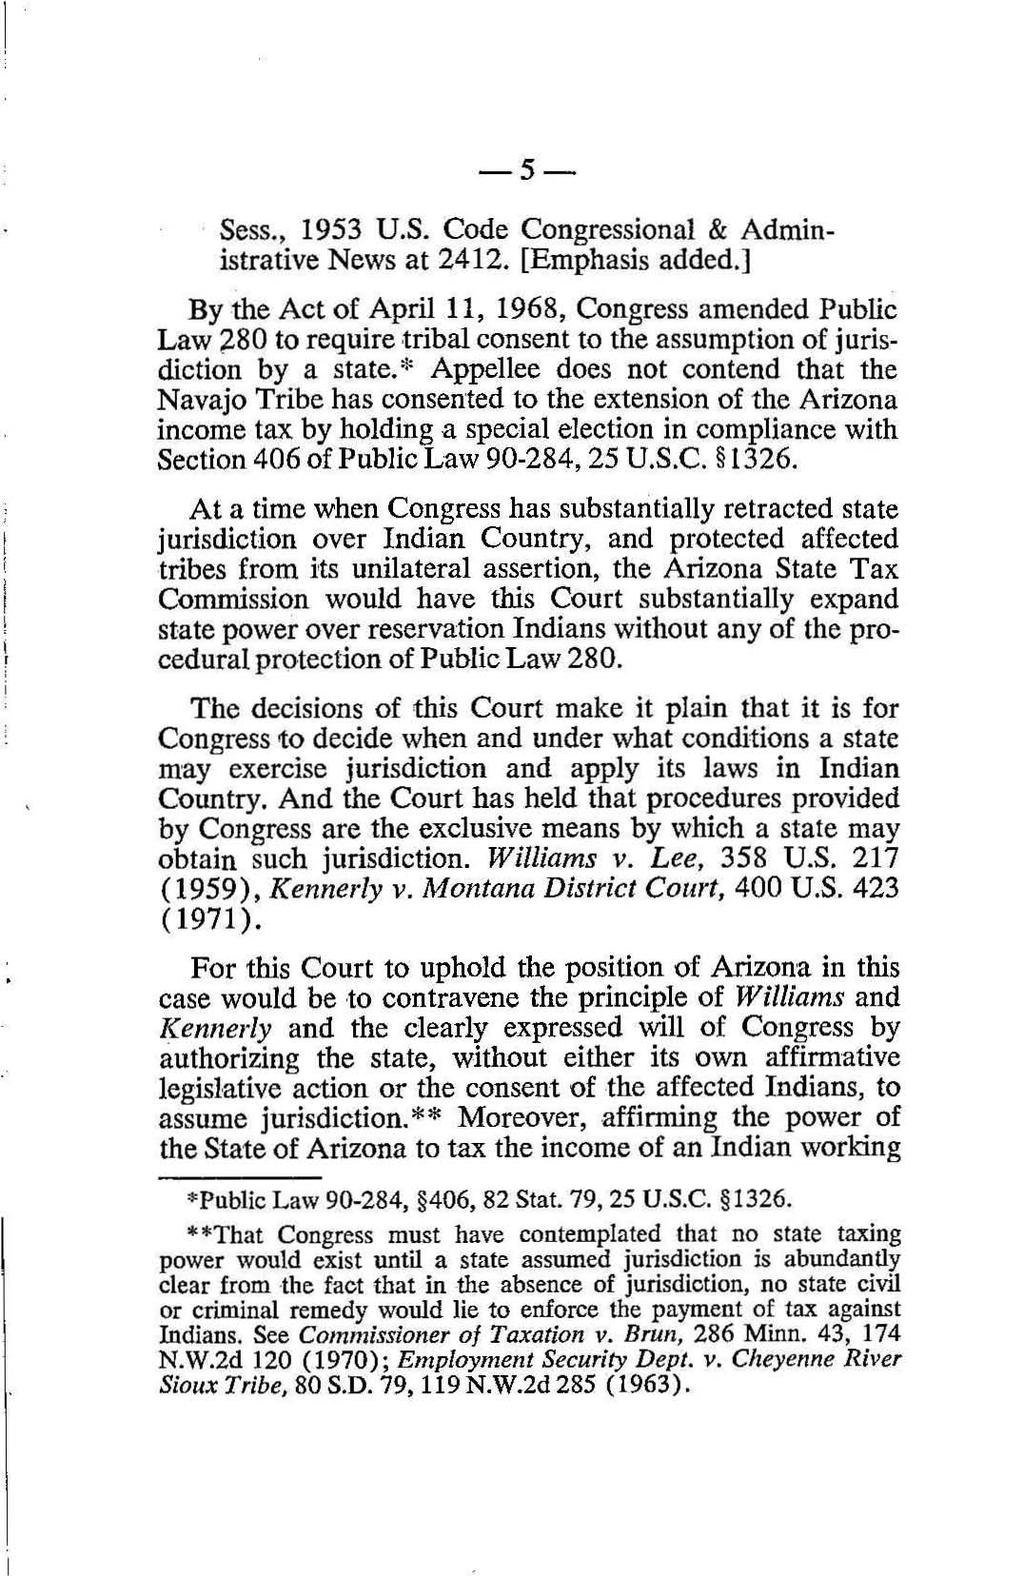 -5- Sess., 1953 U.S. Code Congressional & Administrative News at 2412. [Emphasis added.